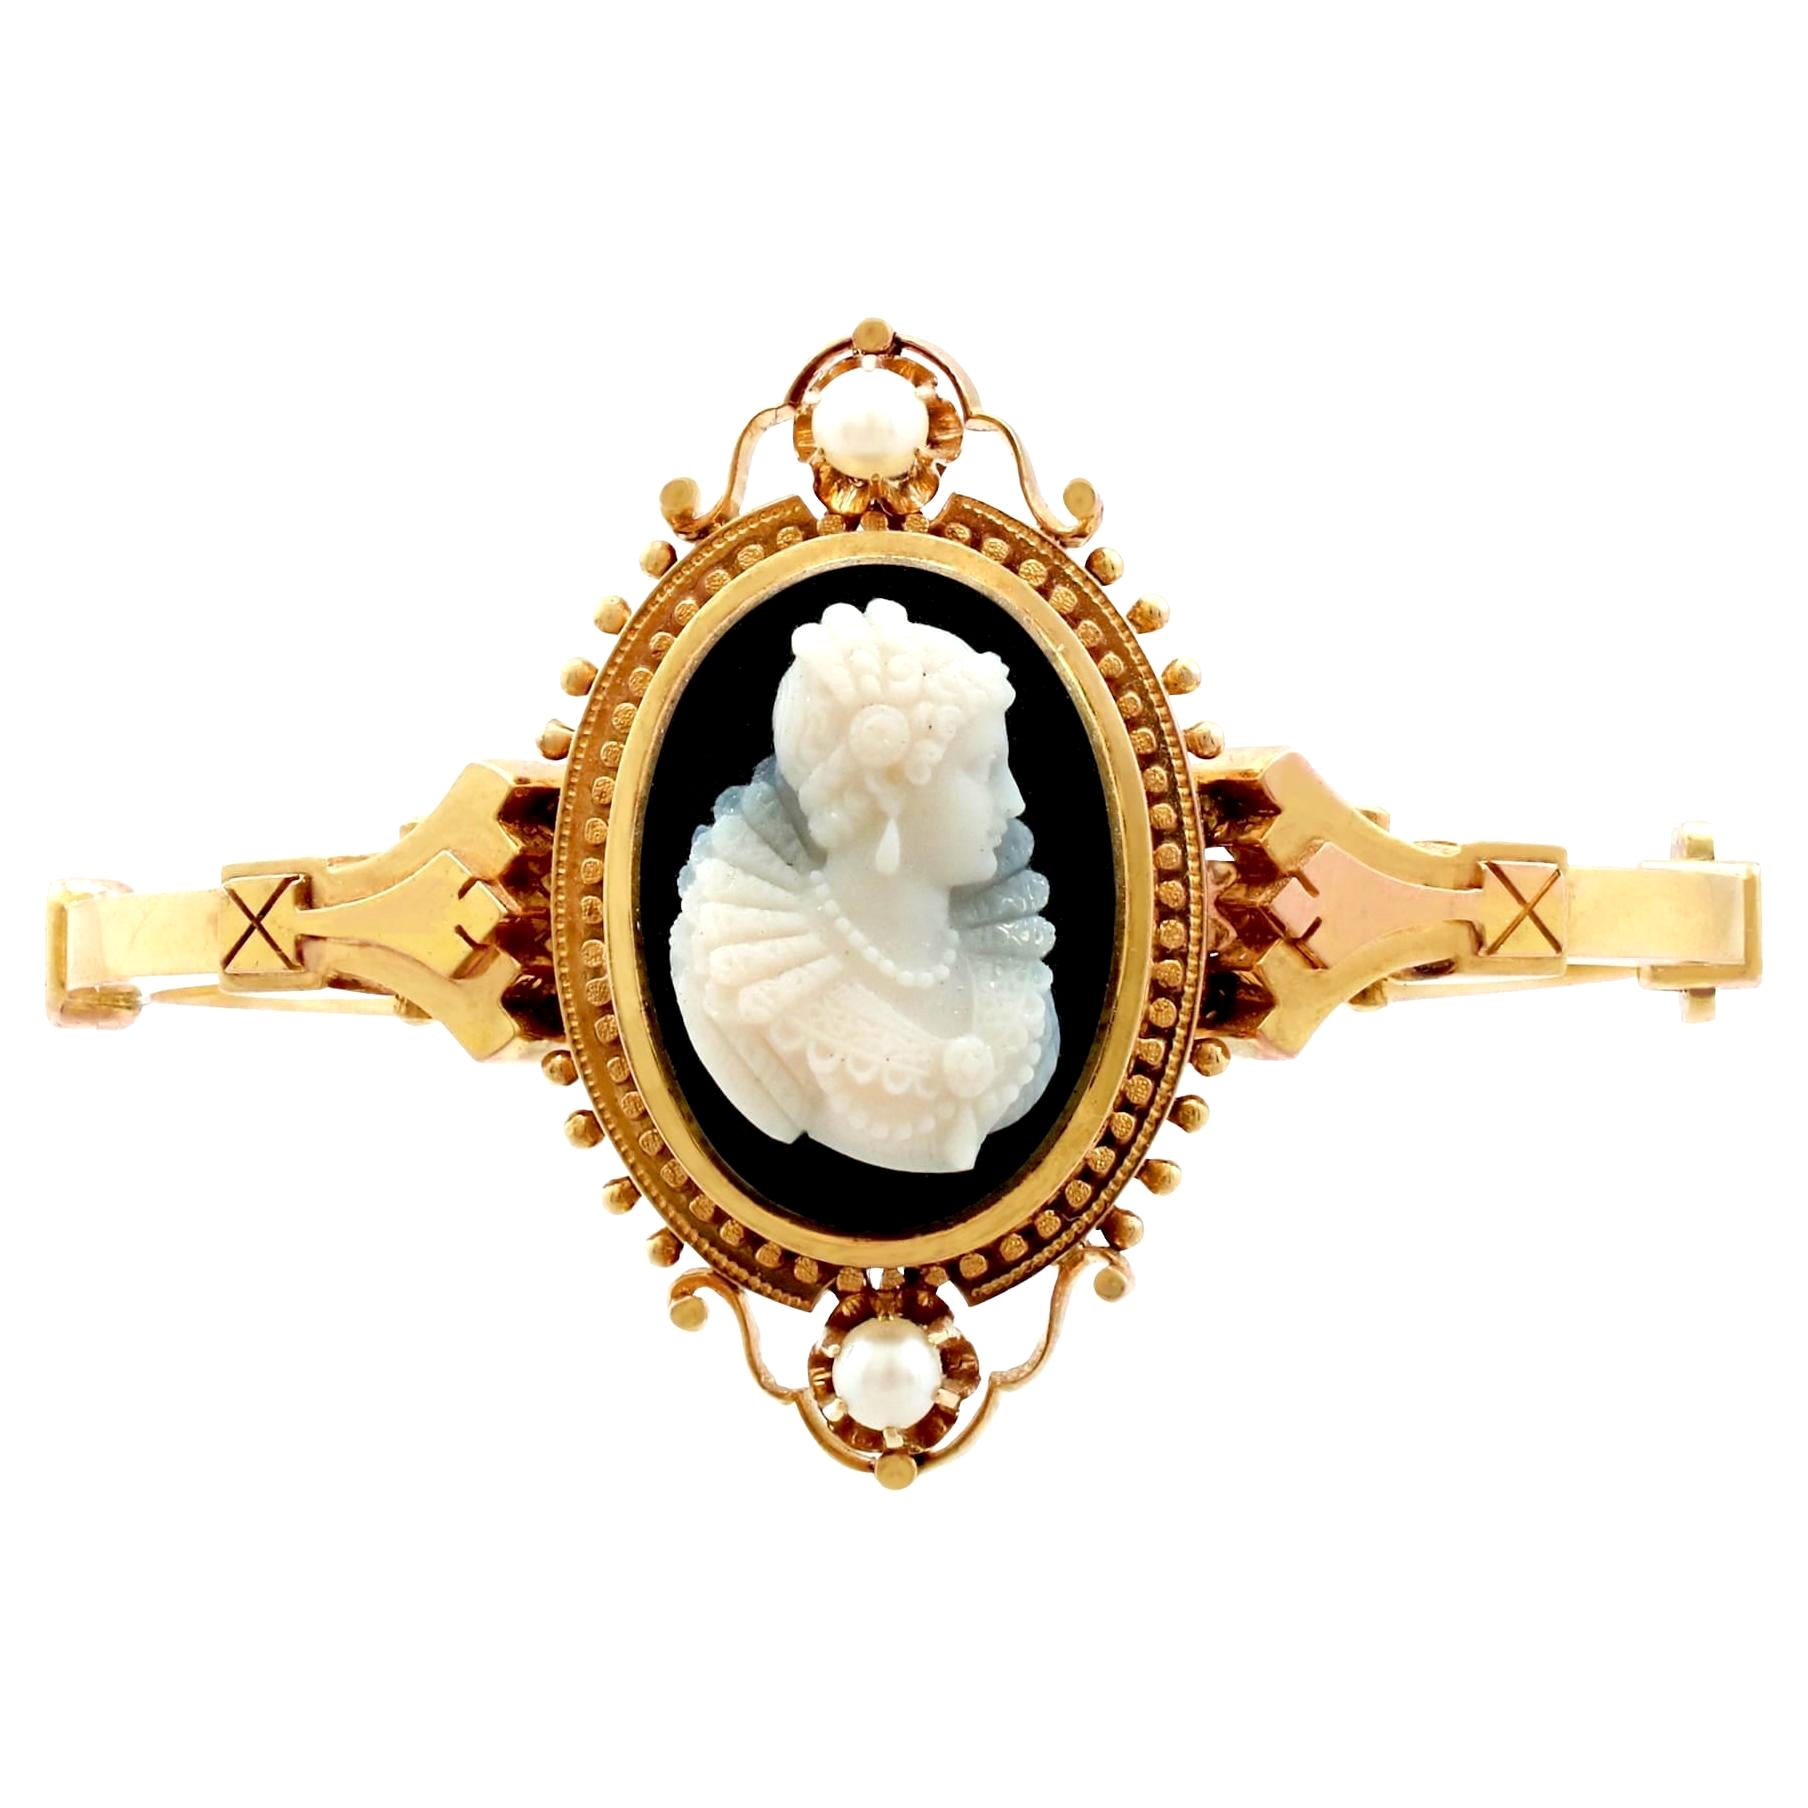 1880s Victorian Cameo Bangle Bracelet with Pearls in Yellow Gold For Sale